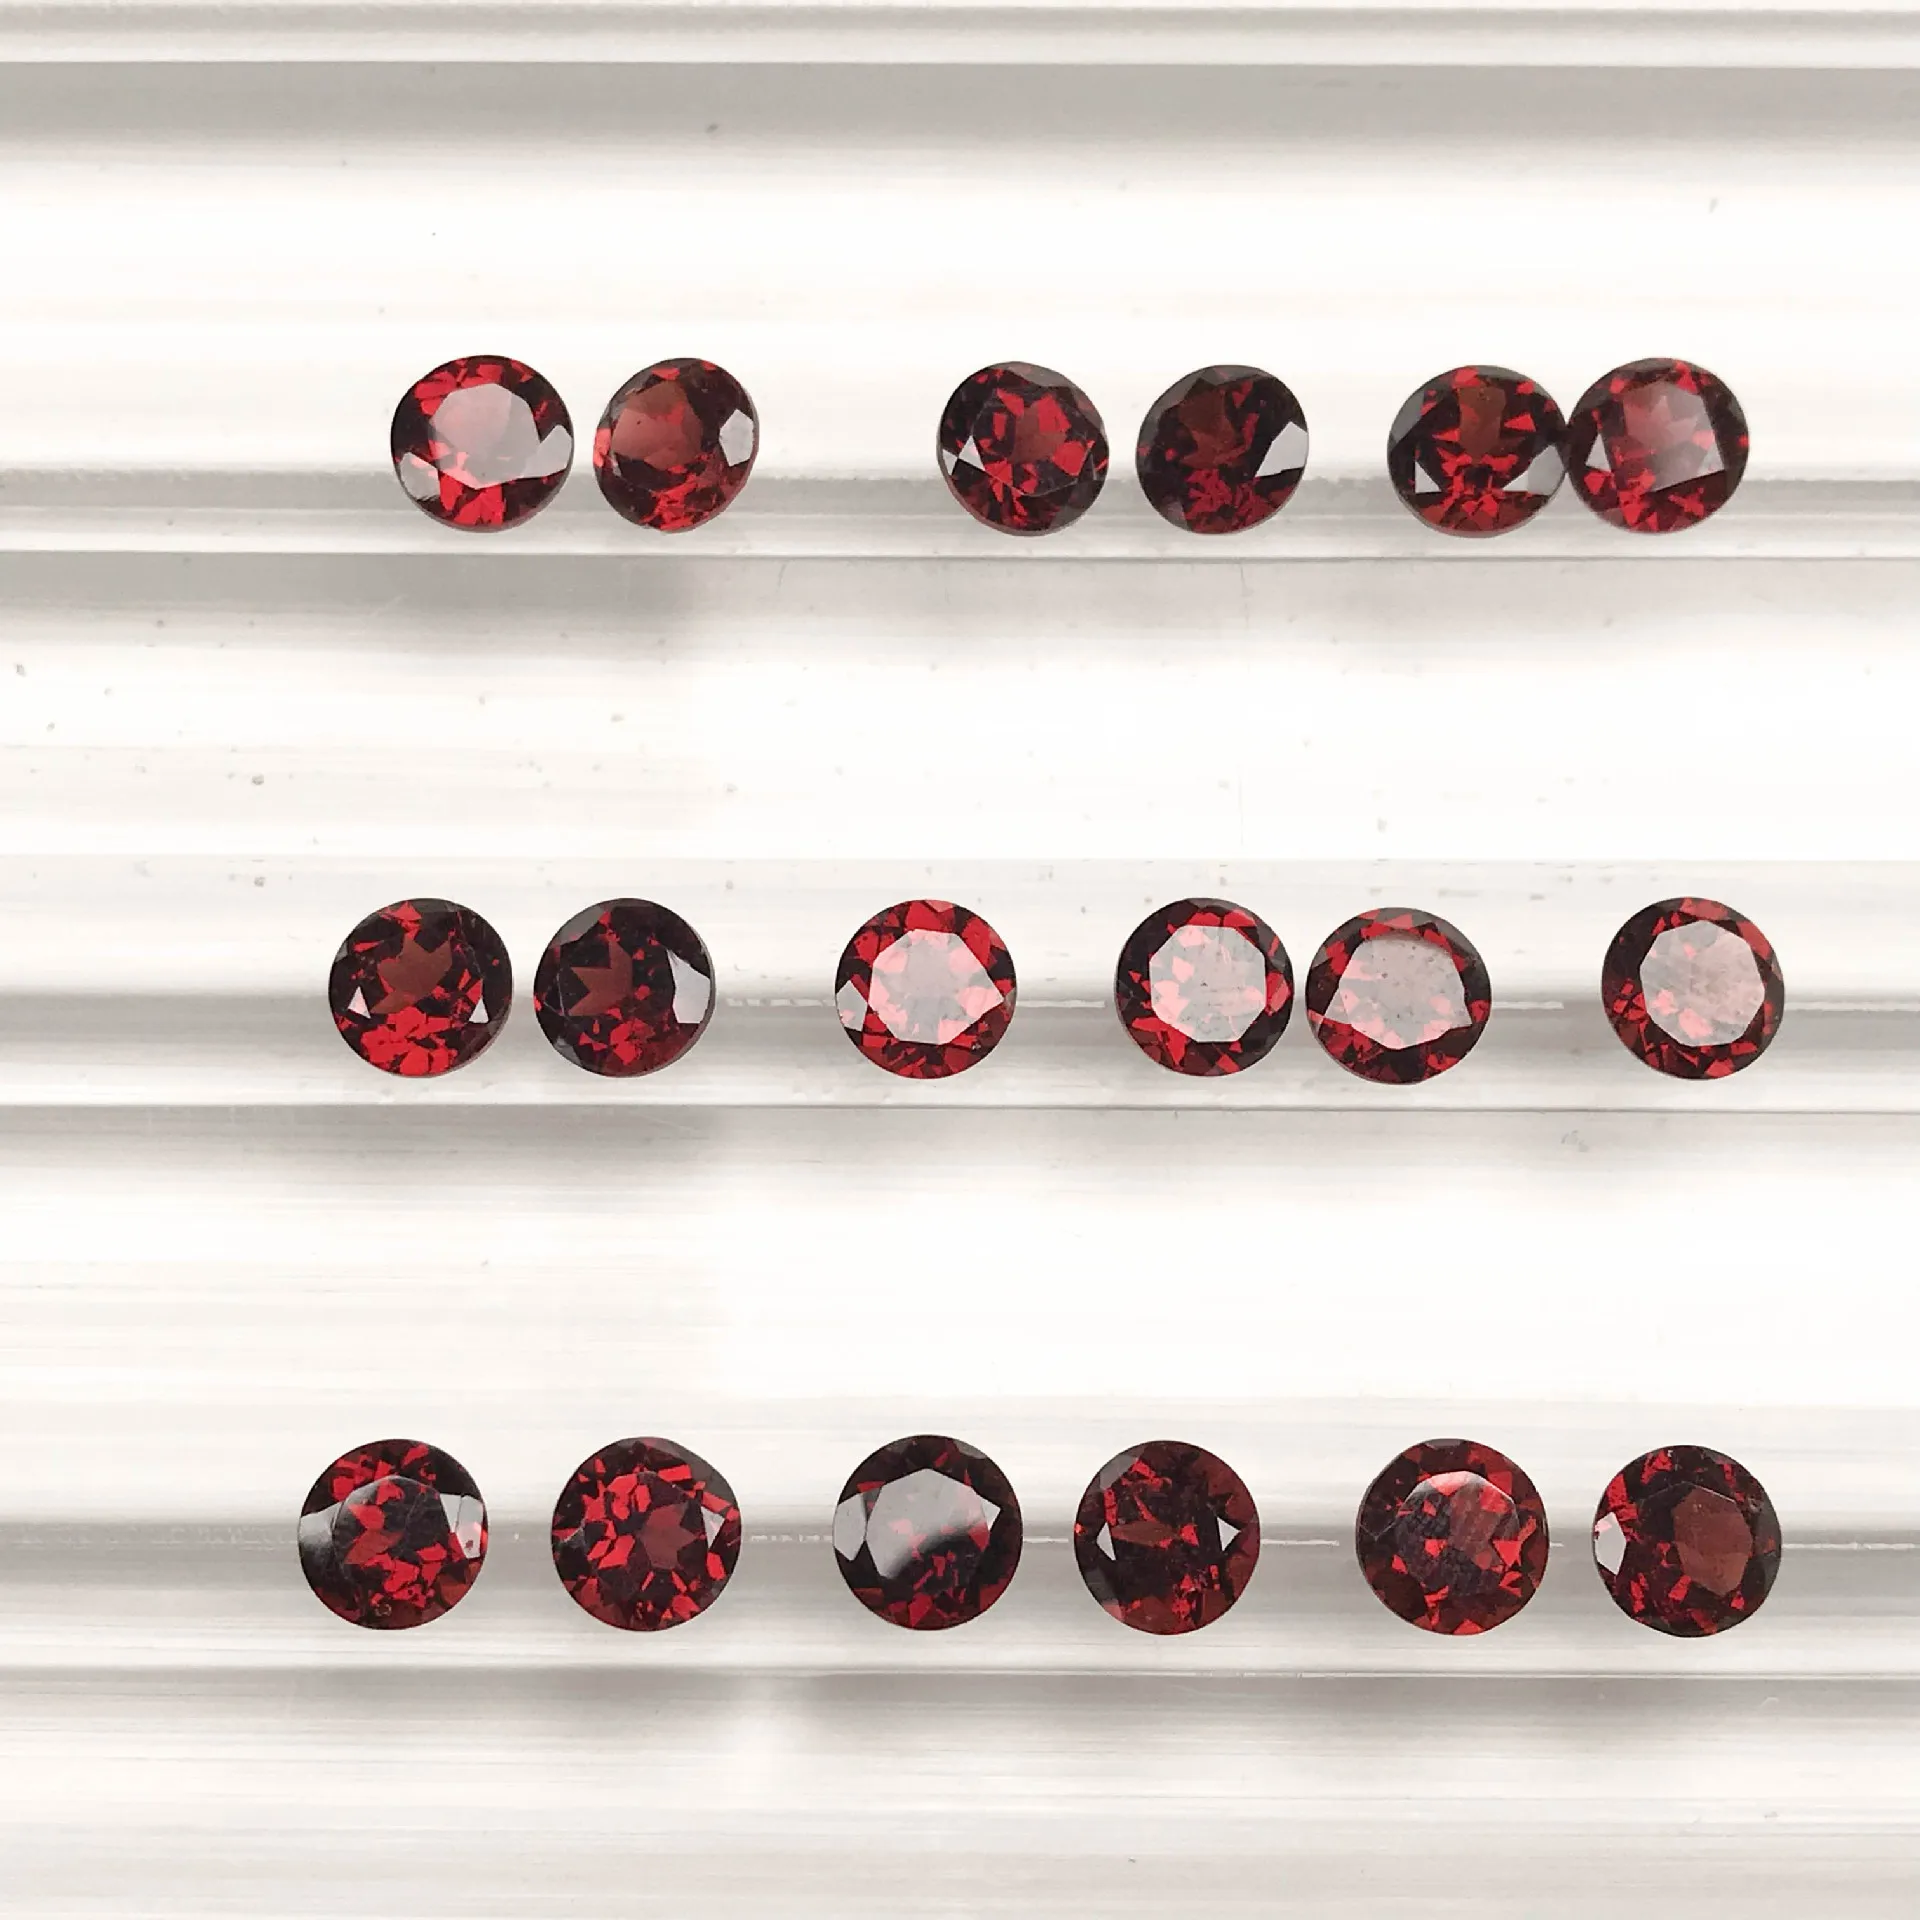 Details about   AAA Quality Natural 5mm Red Garnet Round Cabochon Loose Gemstone Wholesale